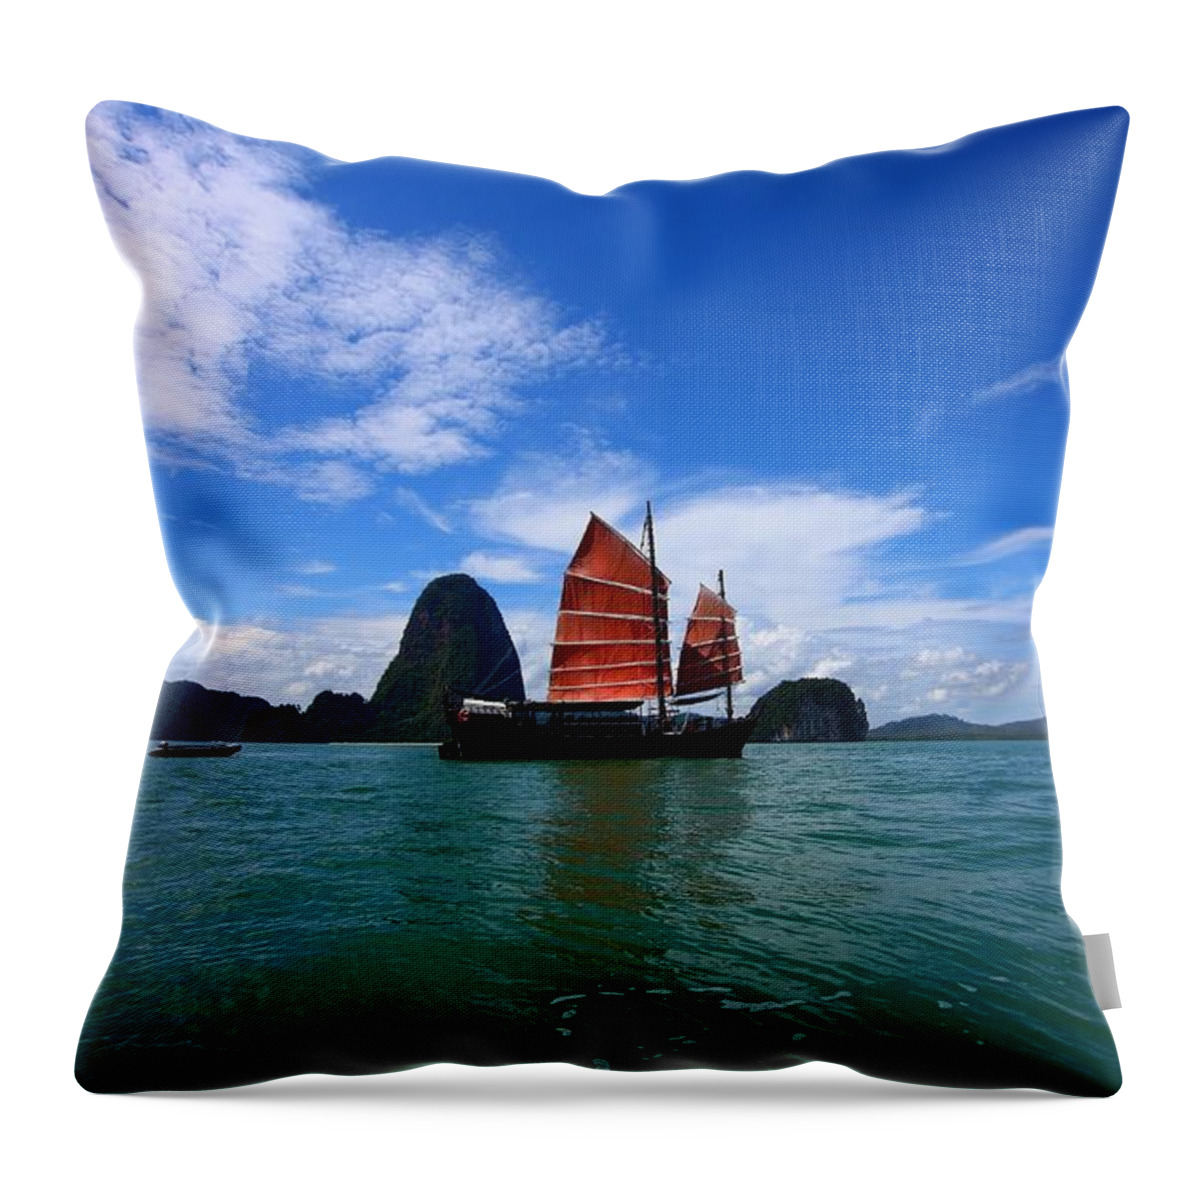 Tranquility Throw Pillow featuring the photograph Chinese Junk Boat by Firefluxstudios